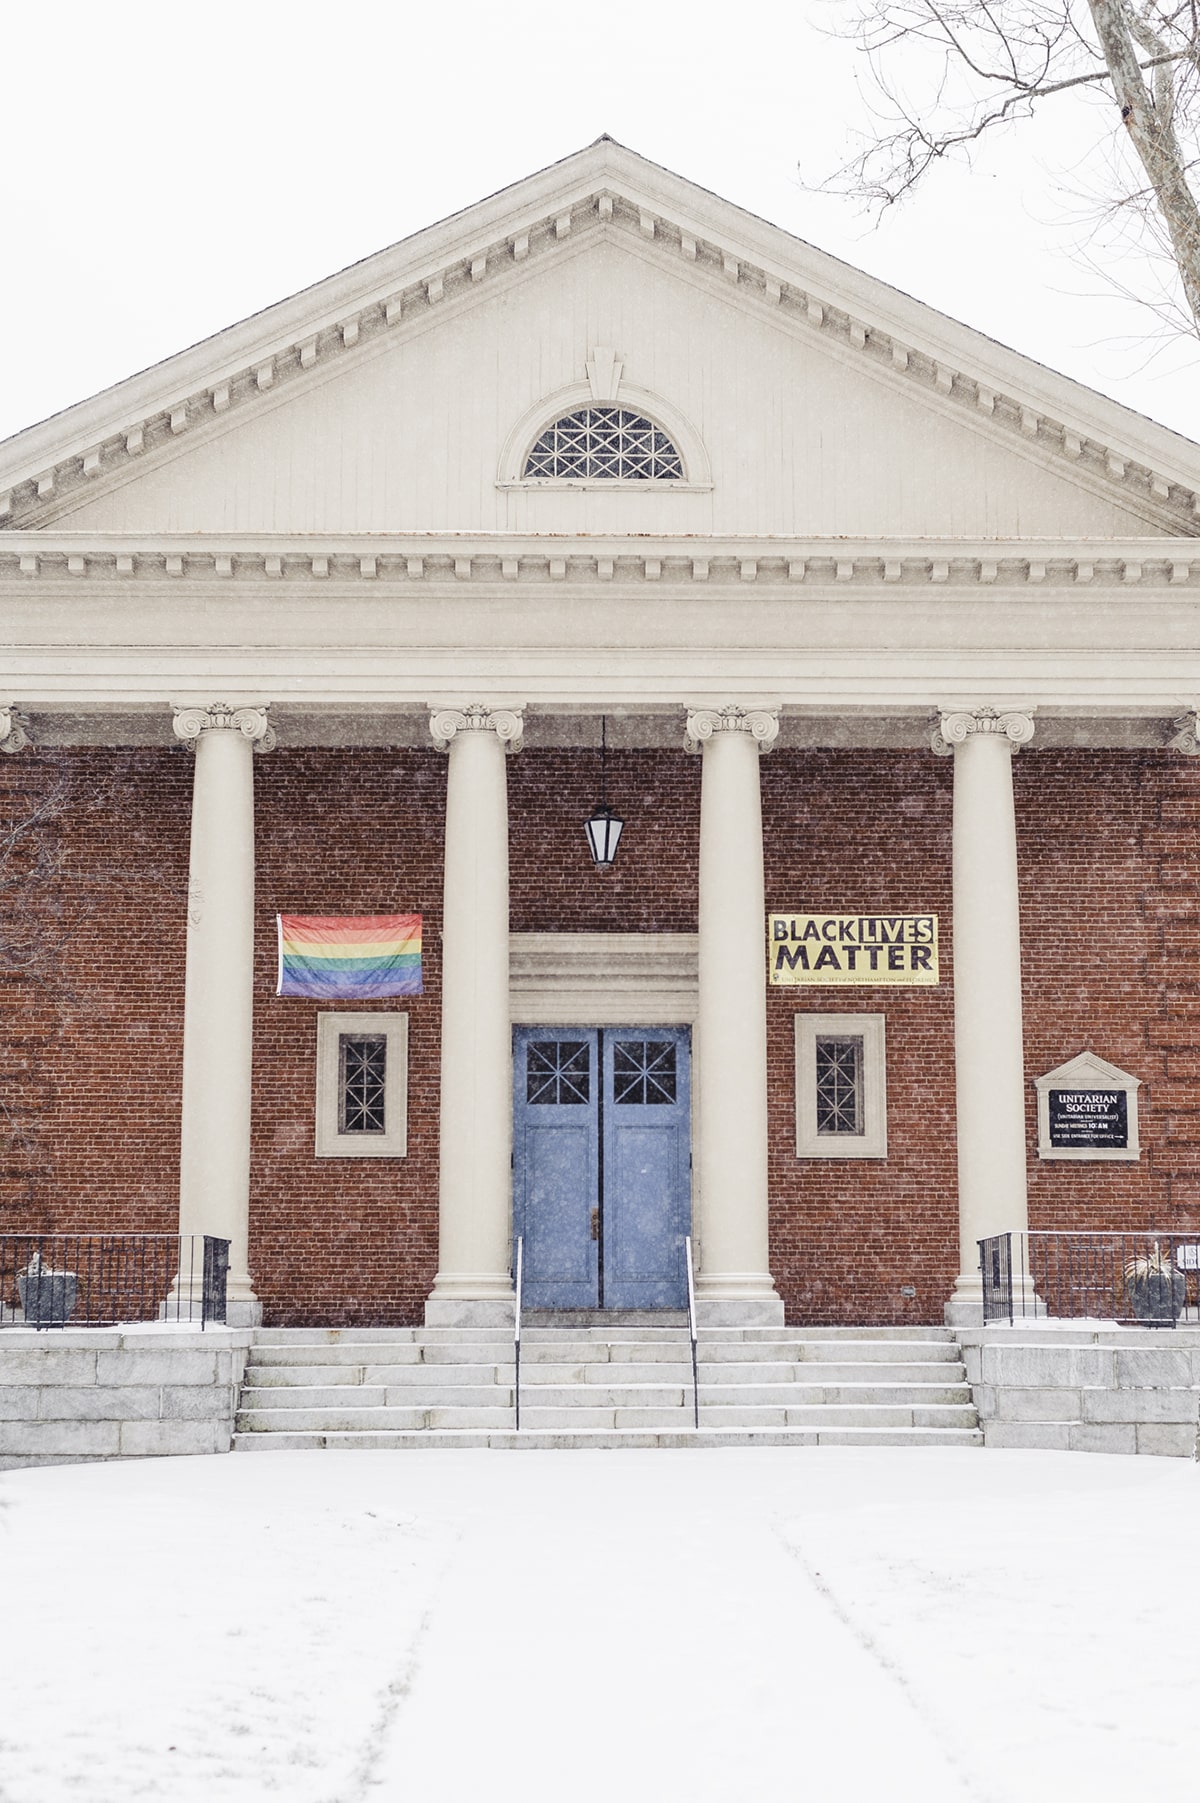 The front facade of the Unitarian Society of Northampton and Florence speaks to its inclusivity.